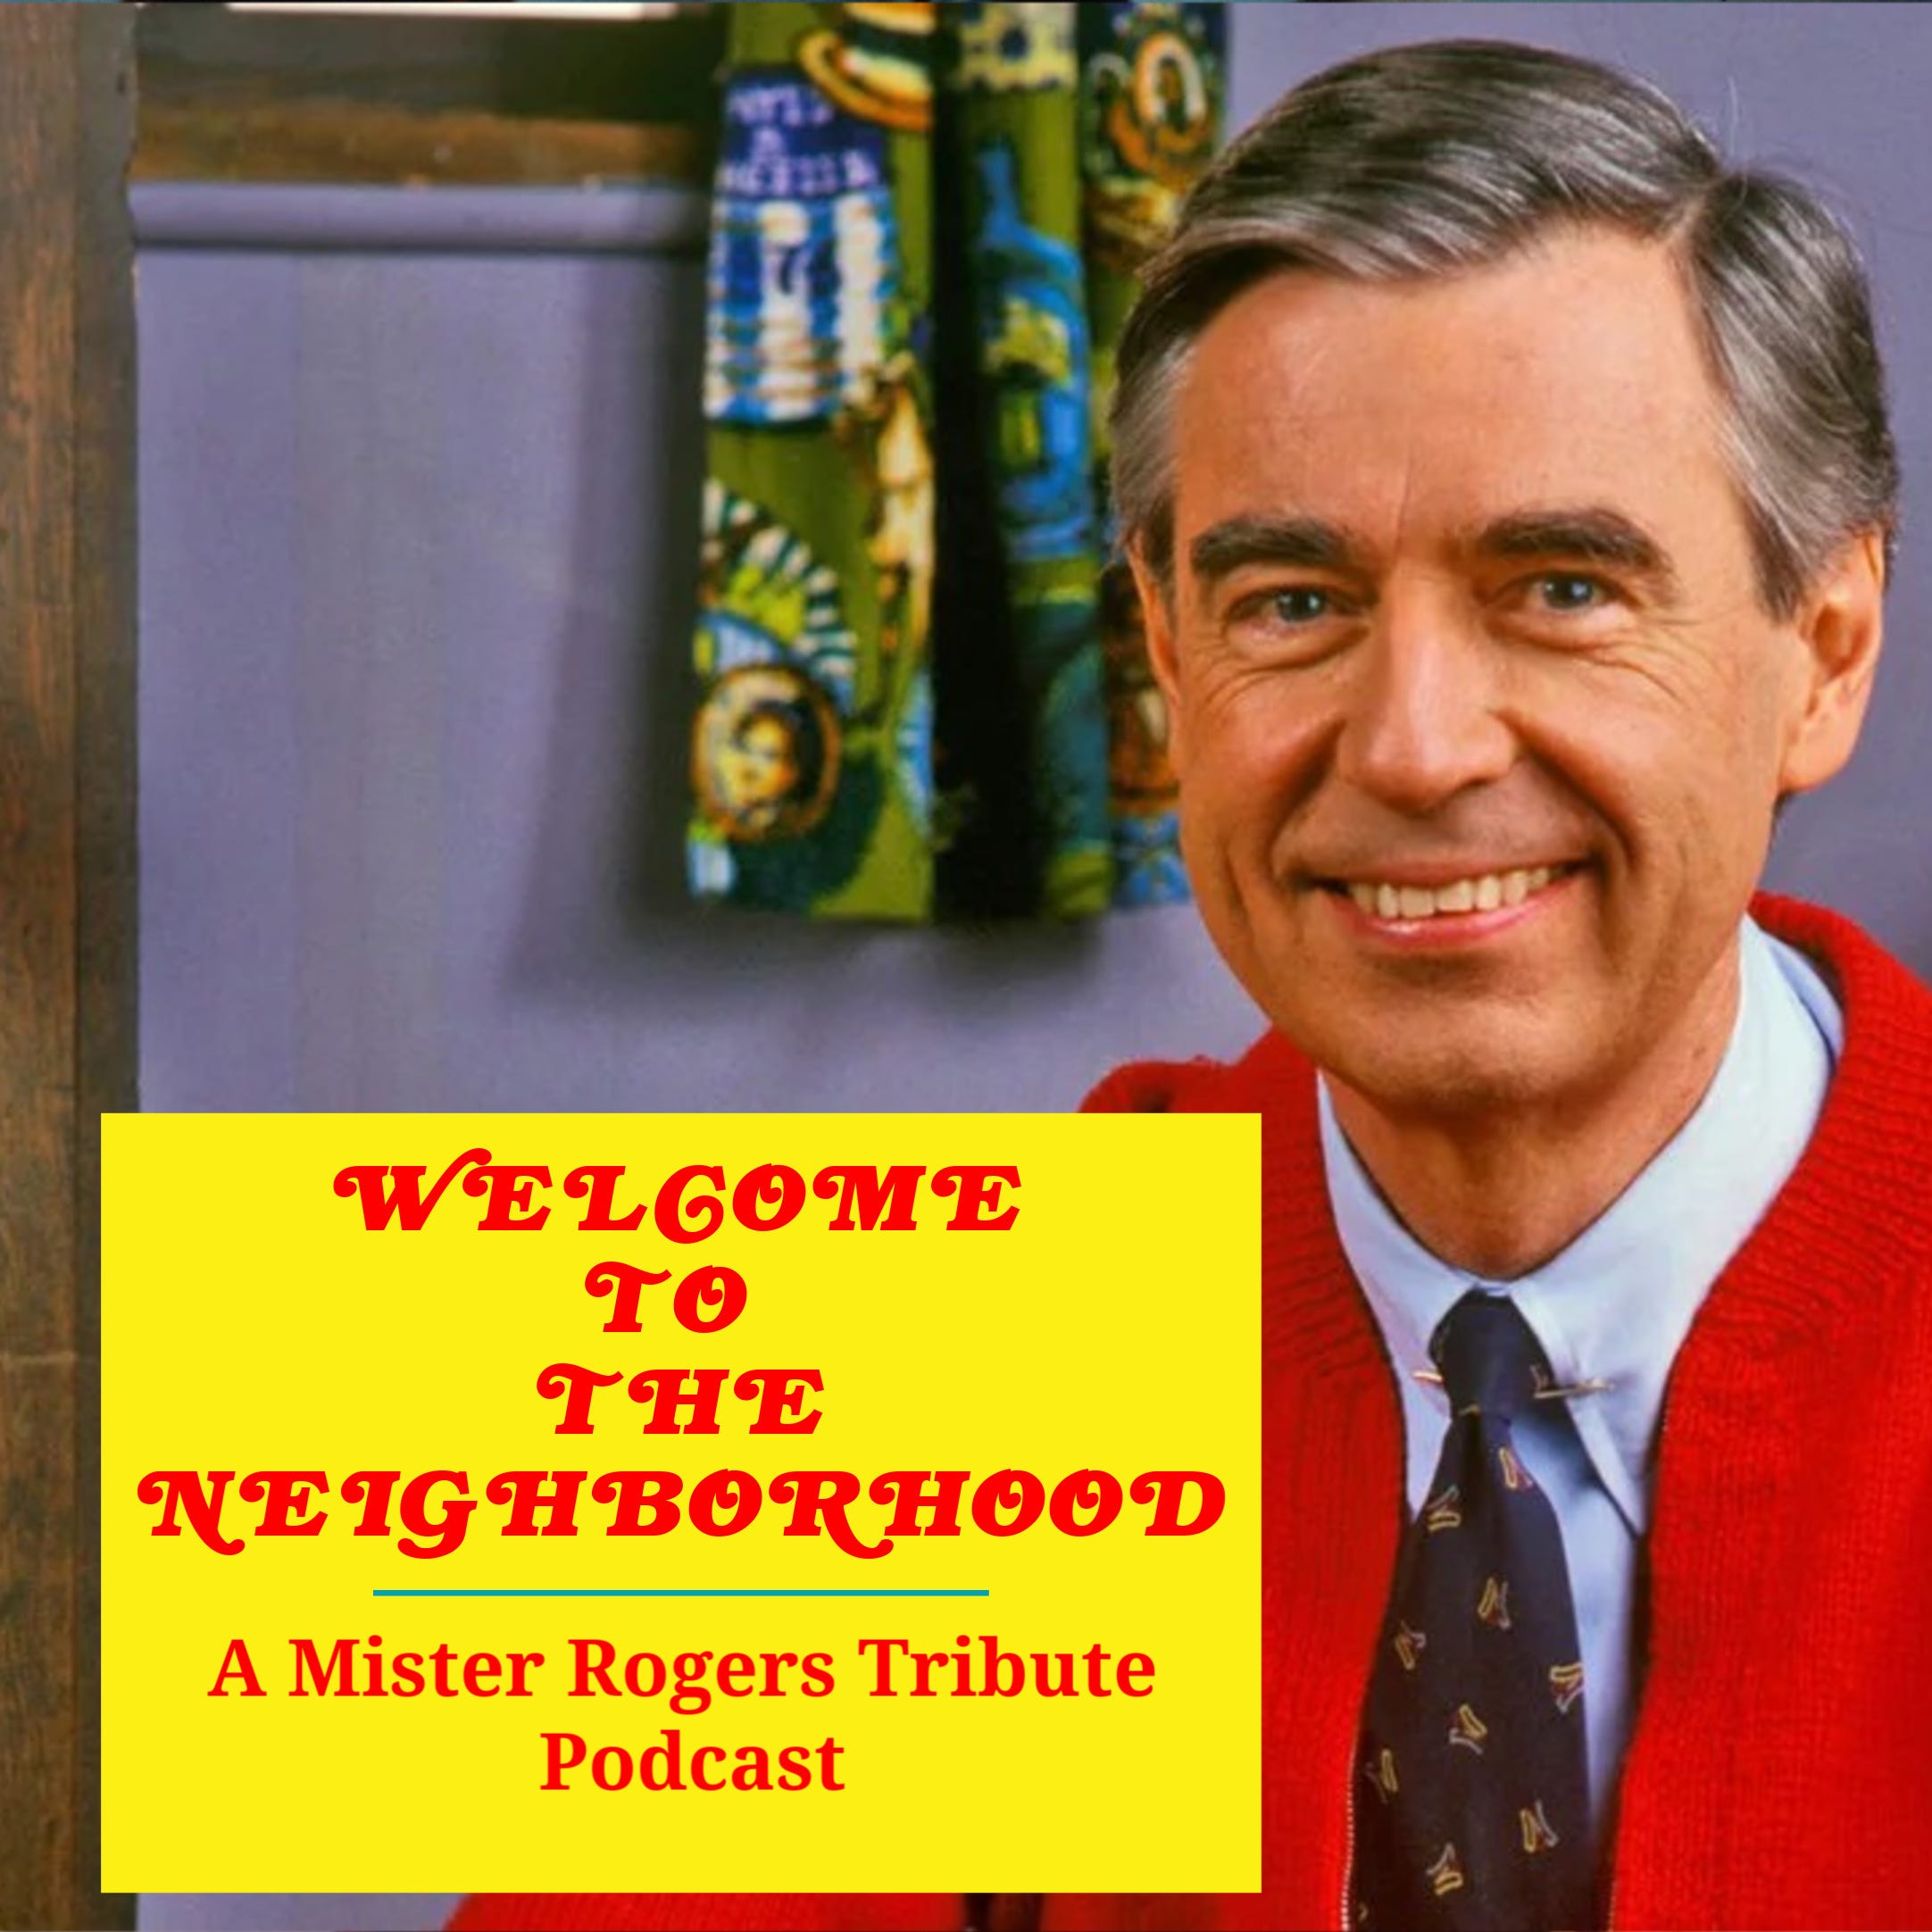 Welcome To The Neighborhood: A Mister Rogers Tribute Podcast - The Ordination of Fred Rogers - with Guest David Dault